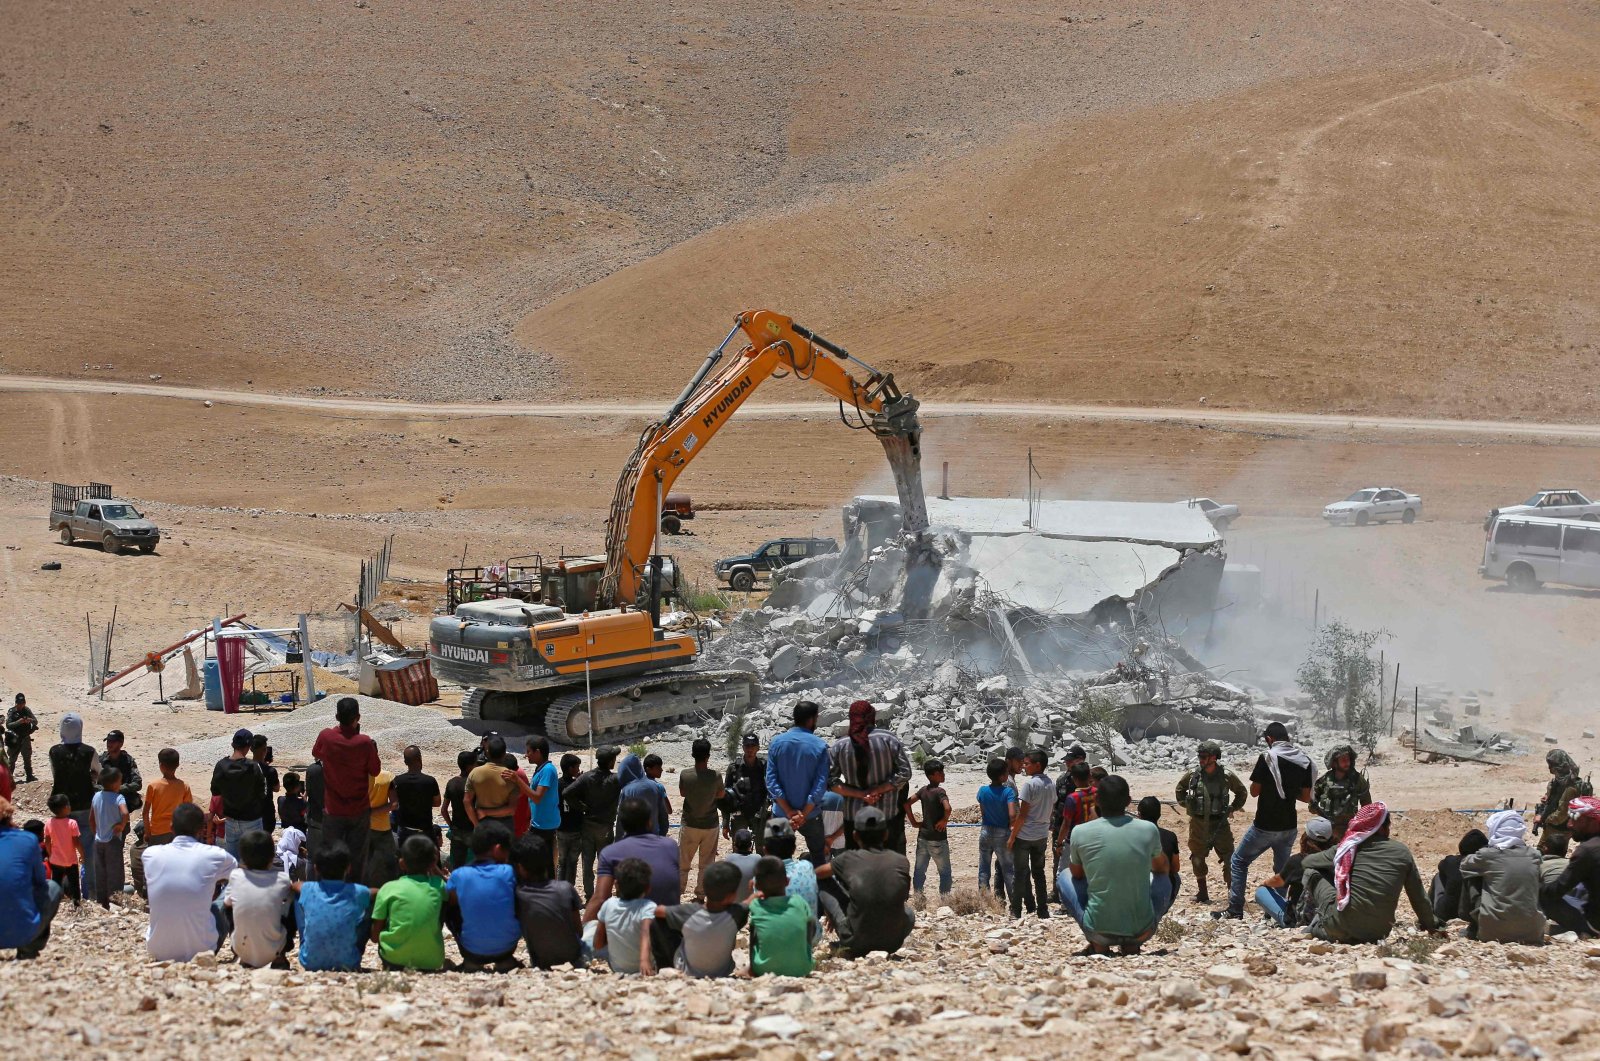 Residents watch as an Israeli bulldozer demolishes a Palestinian house in the Umm Qasas area of Masafer Yatta in the occupied West Bank, Palestine, July 25, 2022. (AFP File Photo)